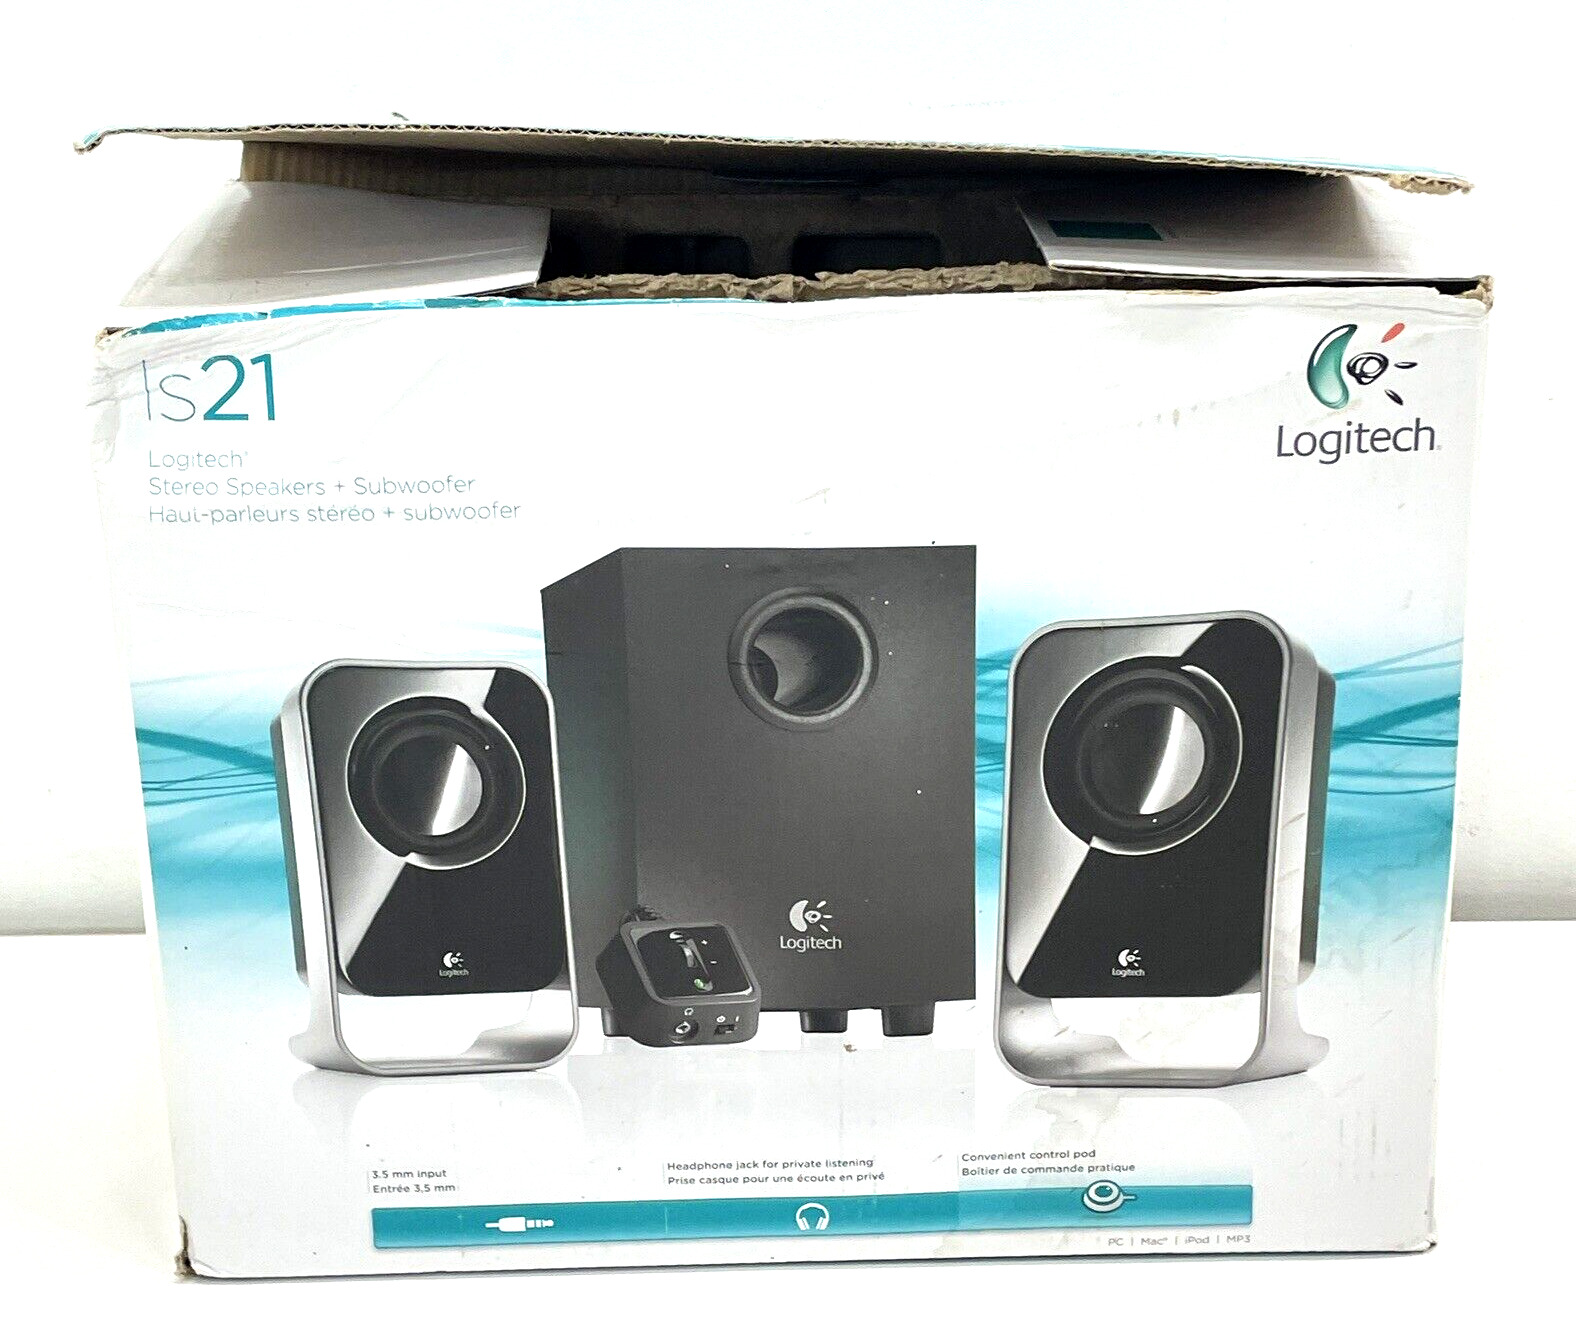 NEW OPEN BOX LOGITECH IS21 STEREO SPEAKERS AND SUBWOOFER MULTIMEDIA CONTROLLER